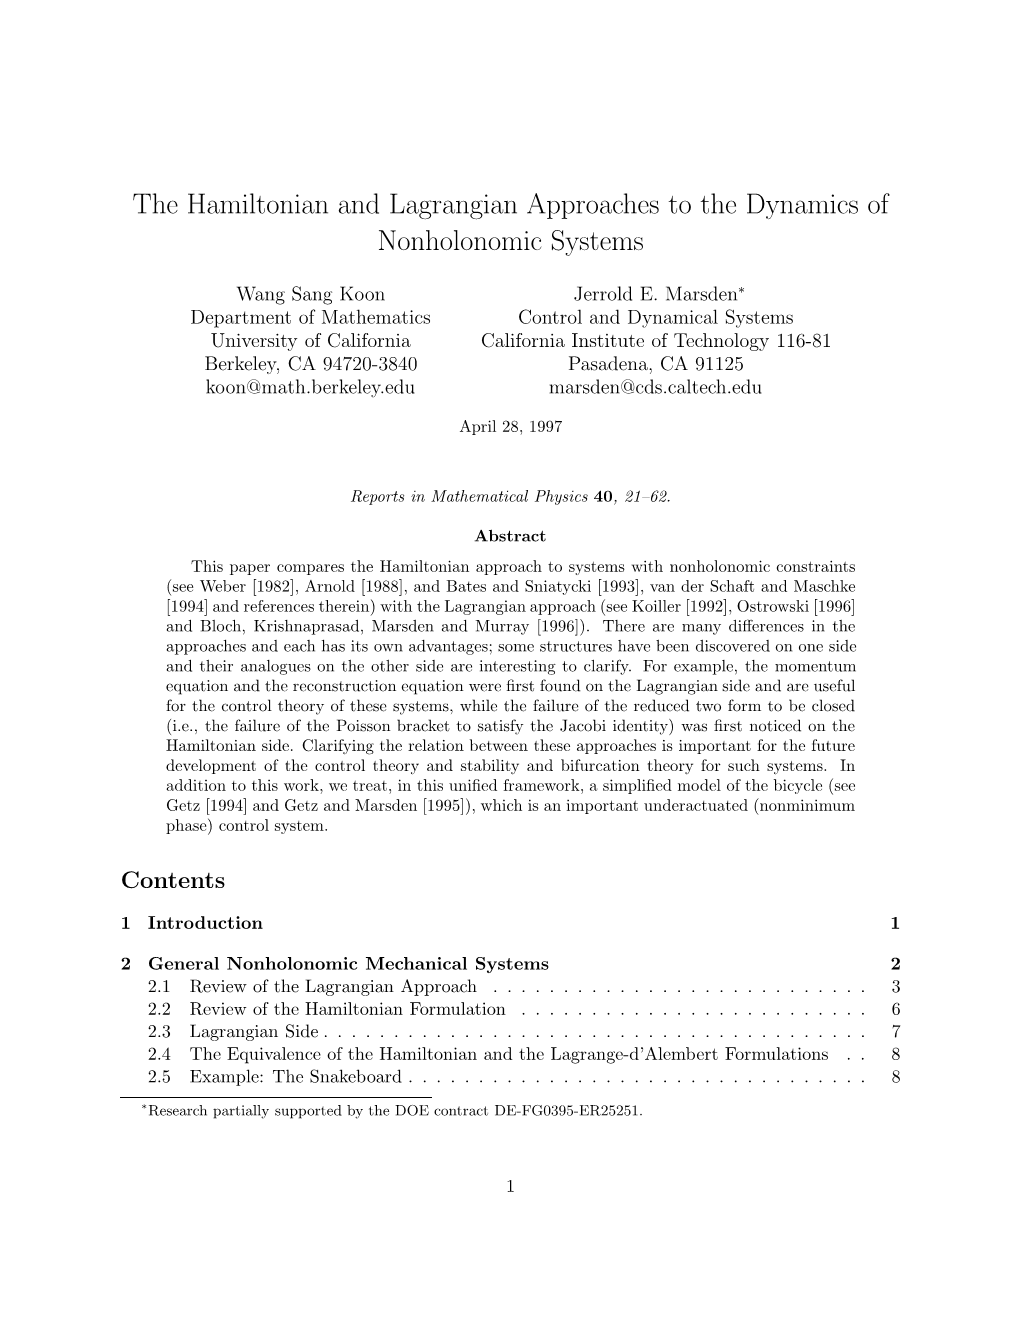 The Hamiltonian and Lagrangian Approaches to the Dynamics of Nonholonomic Systems